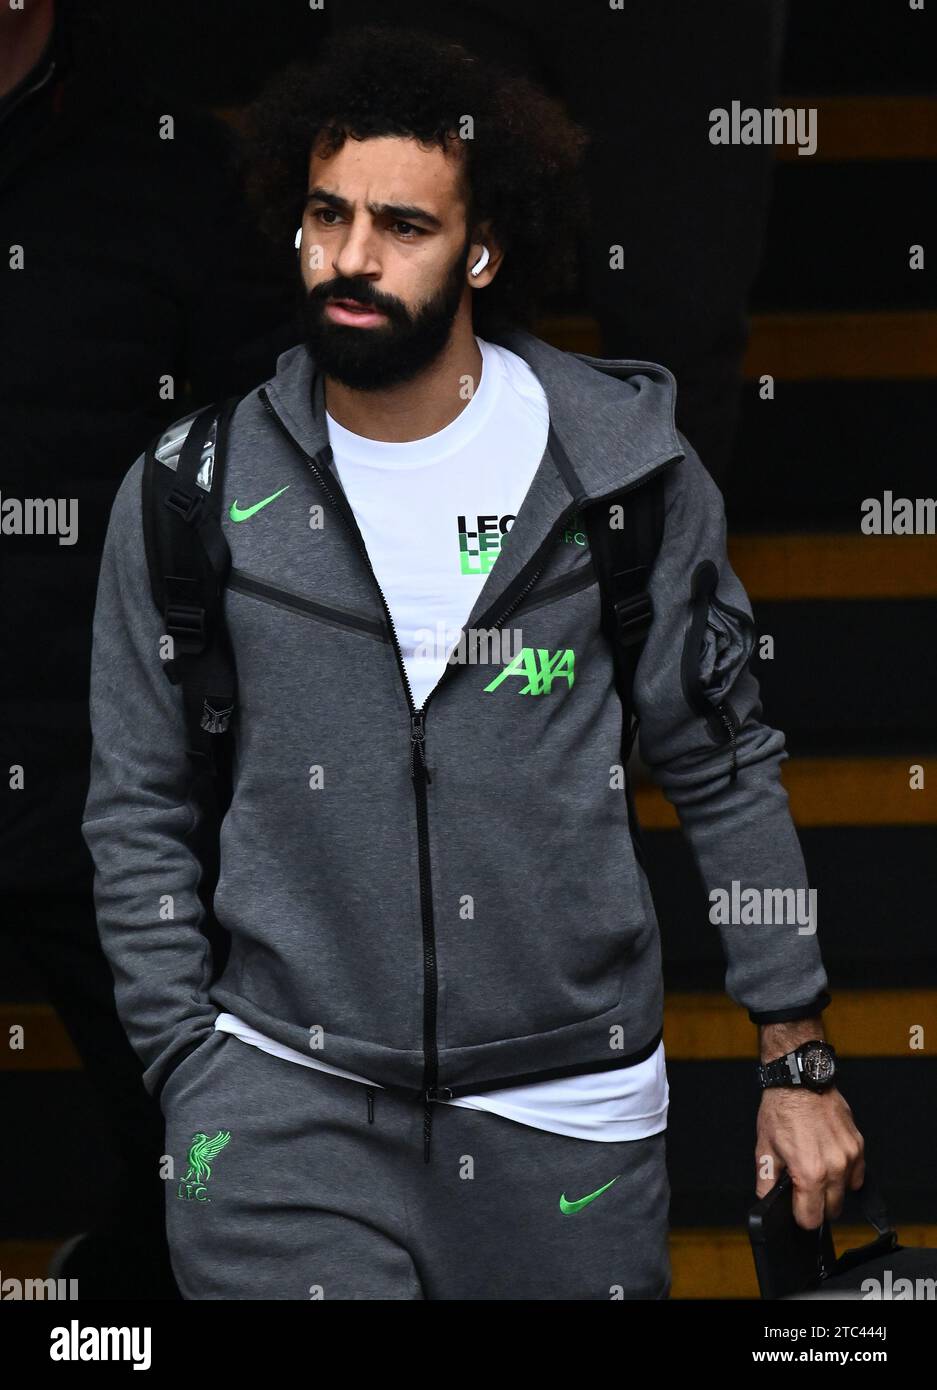 LONDON, ENGLAND - DECEMBER 9: Mohamed Salah of Liverpool FC arrives for the Premier League match between Crystal Palace and Liverpool FC at Selhurst P Stock Photo